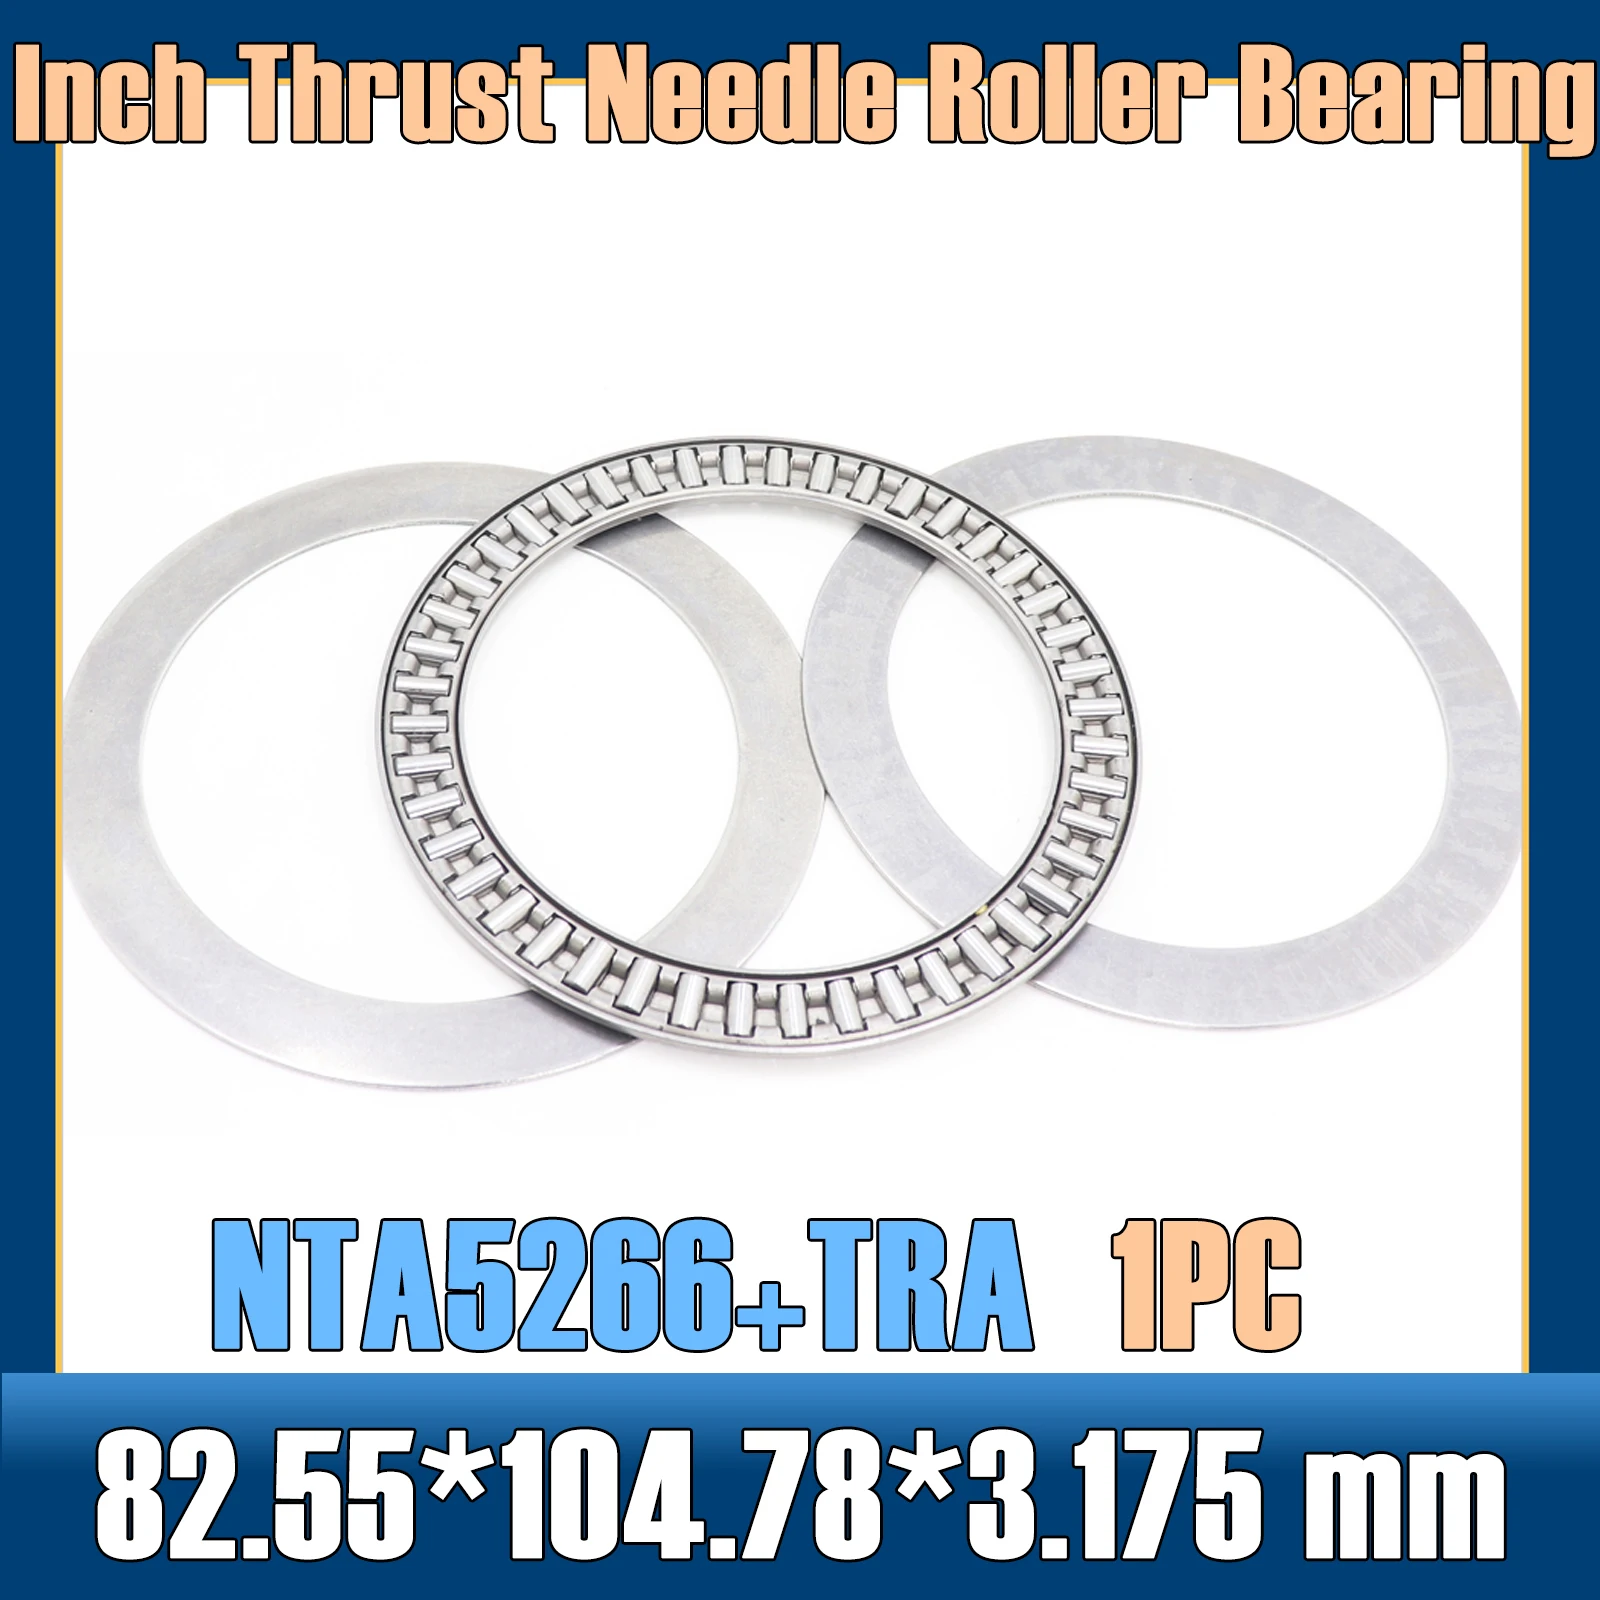 

NTA5266 + 2TRA Inch Thrust Needle Roller Bearing With Two TRA5266 Washers 82.55*104.78*3.175 mm ( 1 PC ) TC5526 NTA5526 Bearings